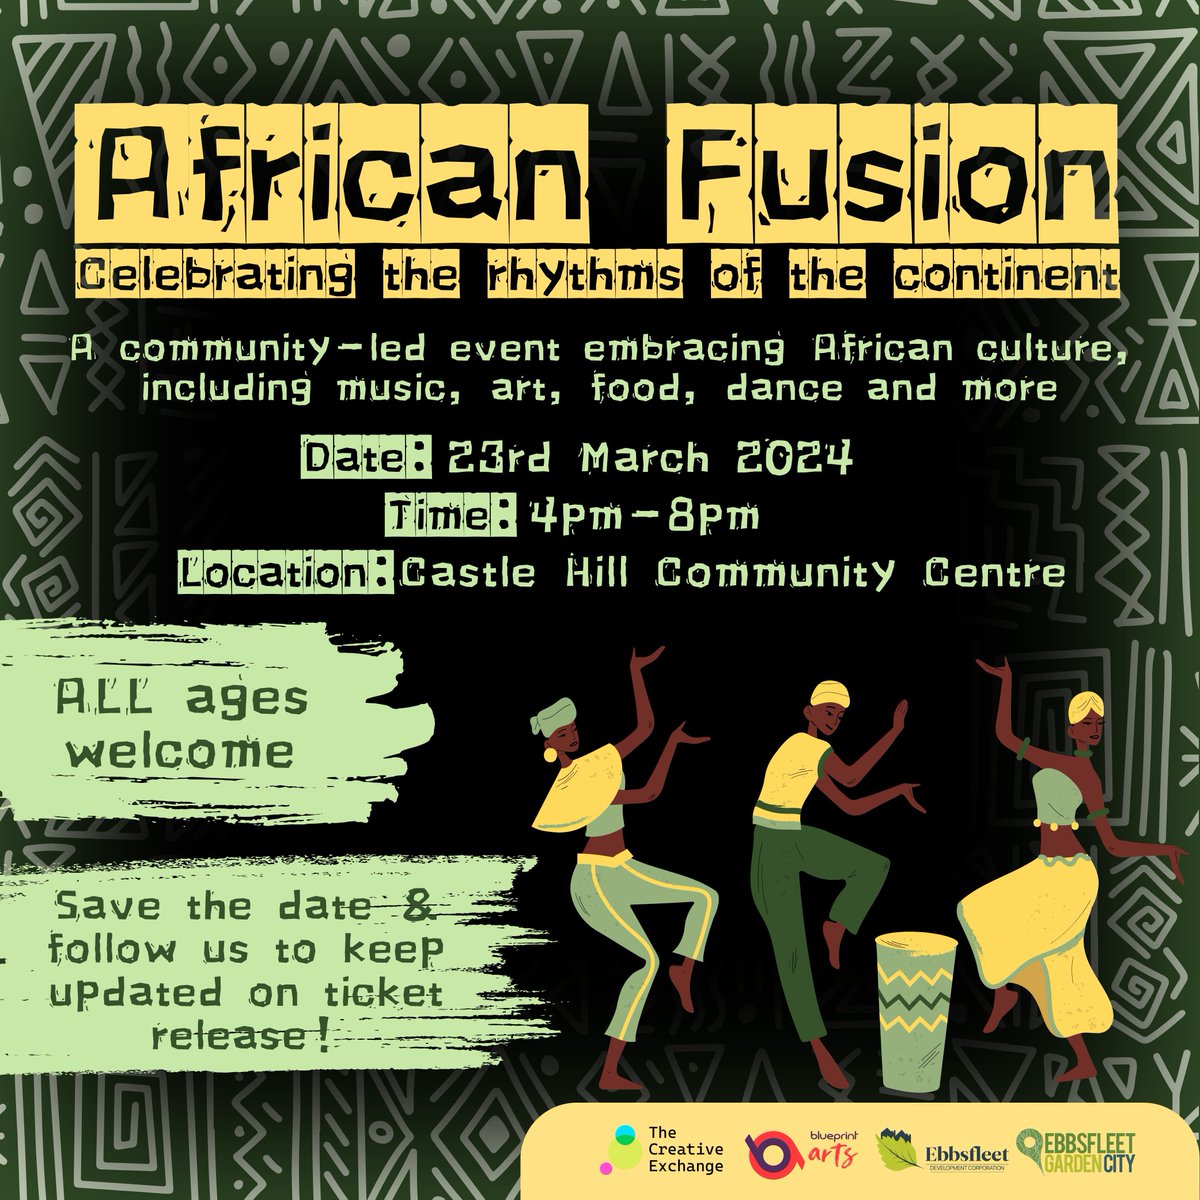 SAVE THE DATE 🎫 African Fusion, celebrating the rhythms of the continent Check out this amazing event coming to Ebbsfleet in March. Tickets released soon 🎉